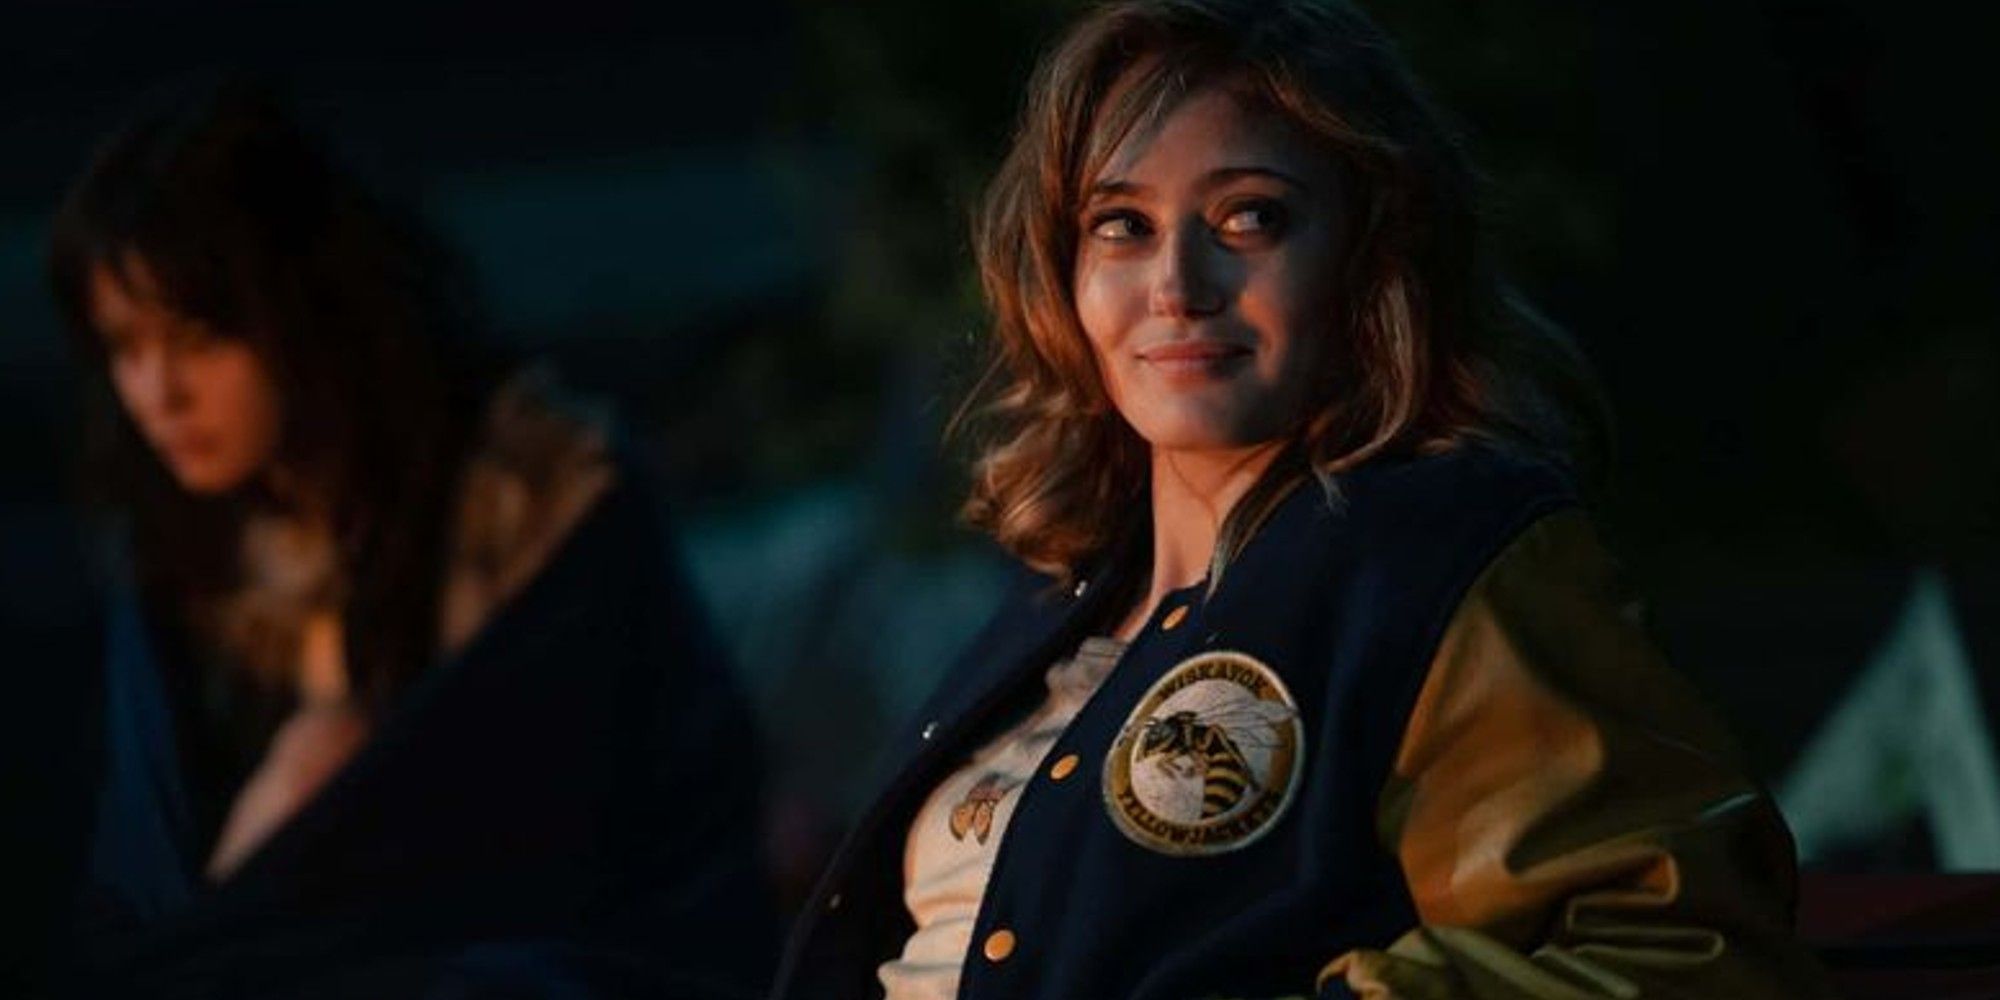 Jackie smiling in her jacket in Yellowjackets season 1